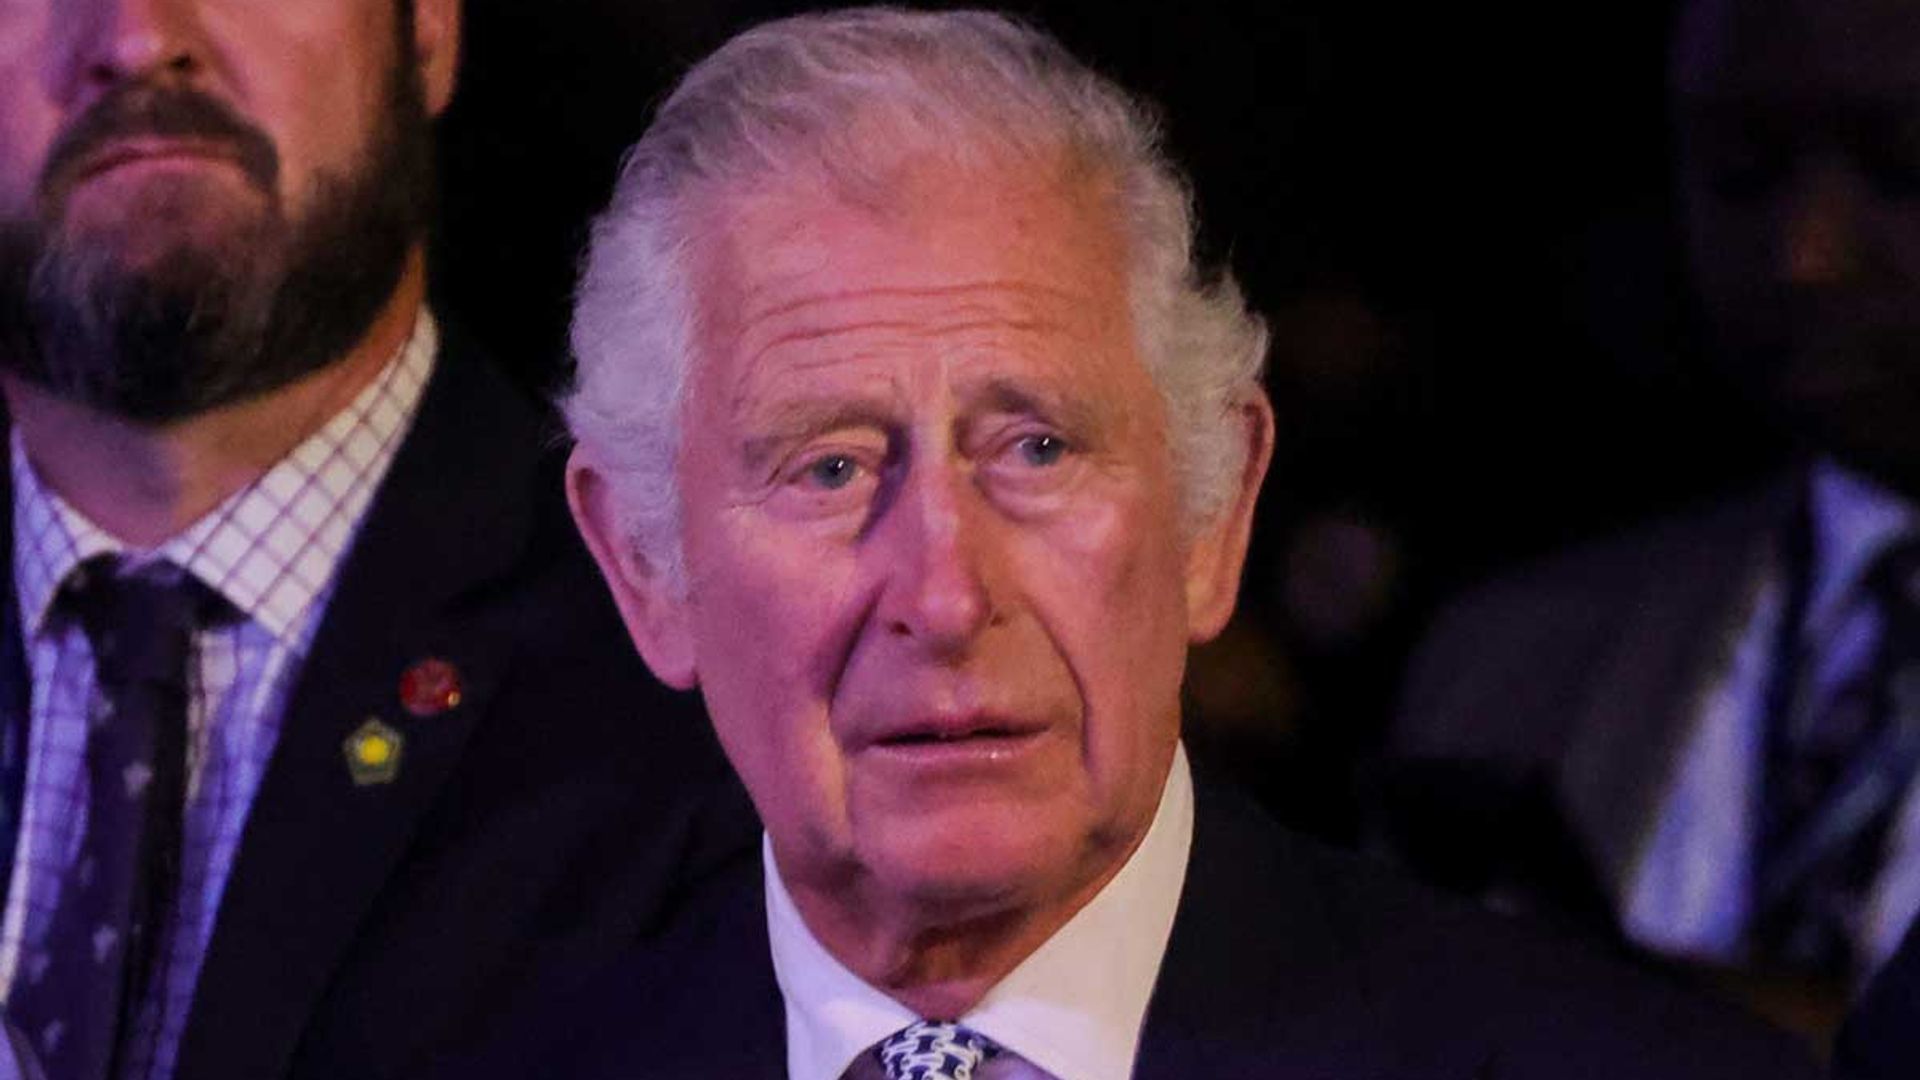 Prince Charles makes rare comment on health impact of Covid – see what he said